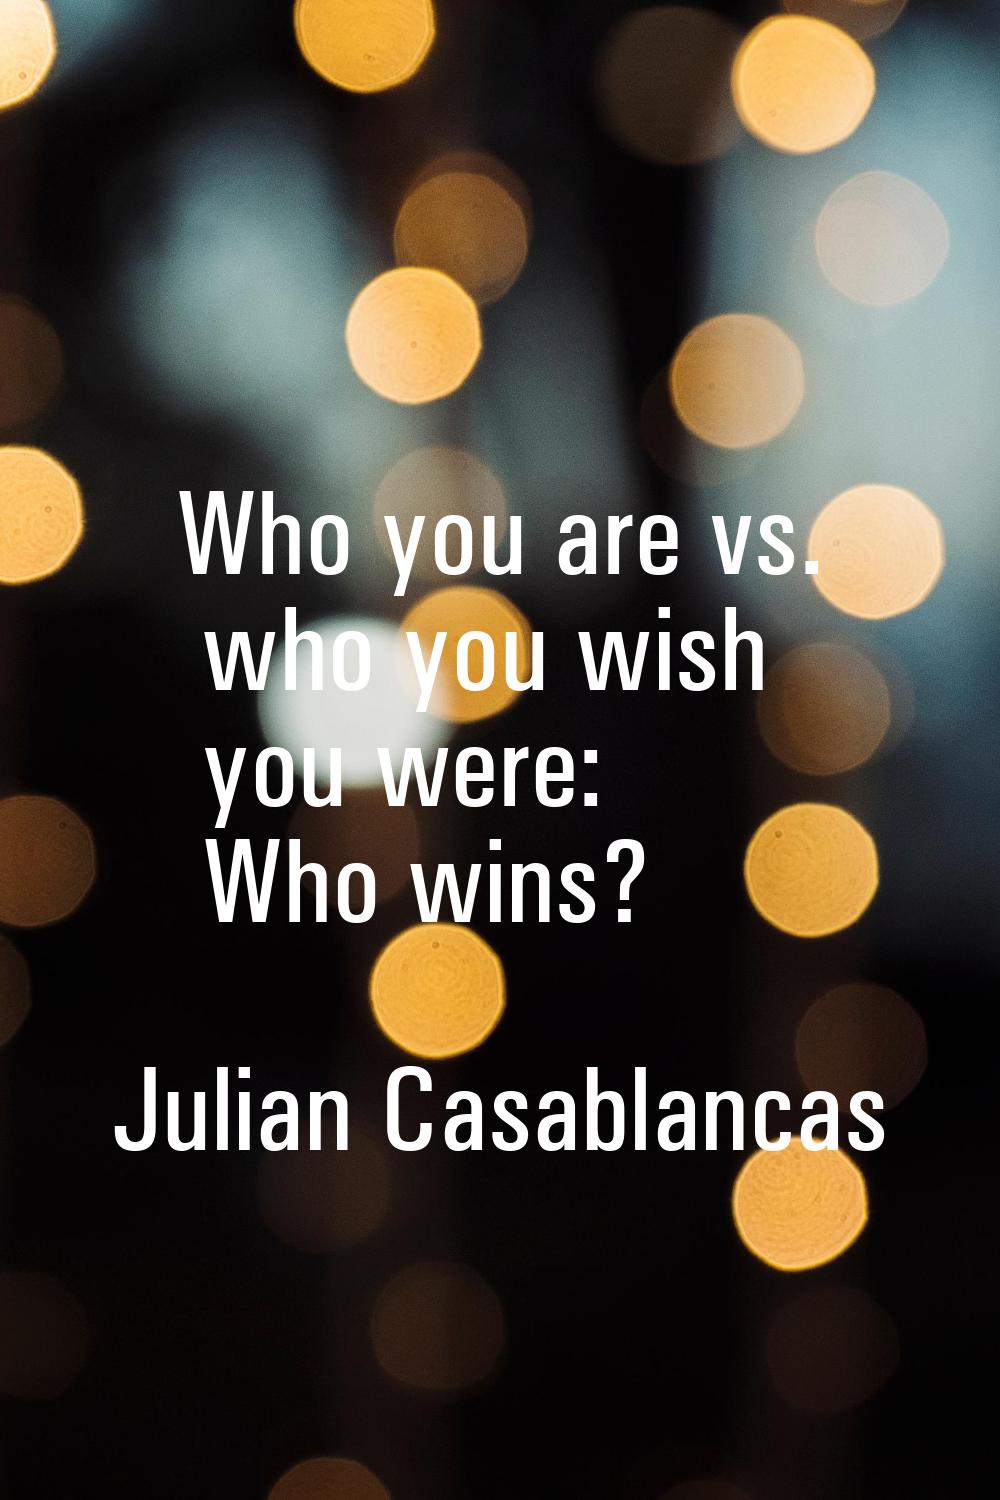 Who you are vs. who you wish you were: Who wins?